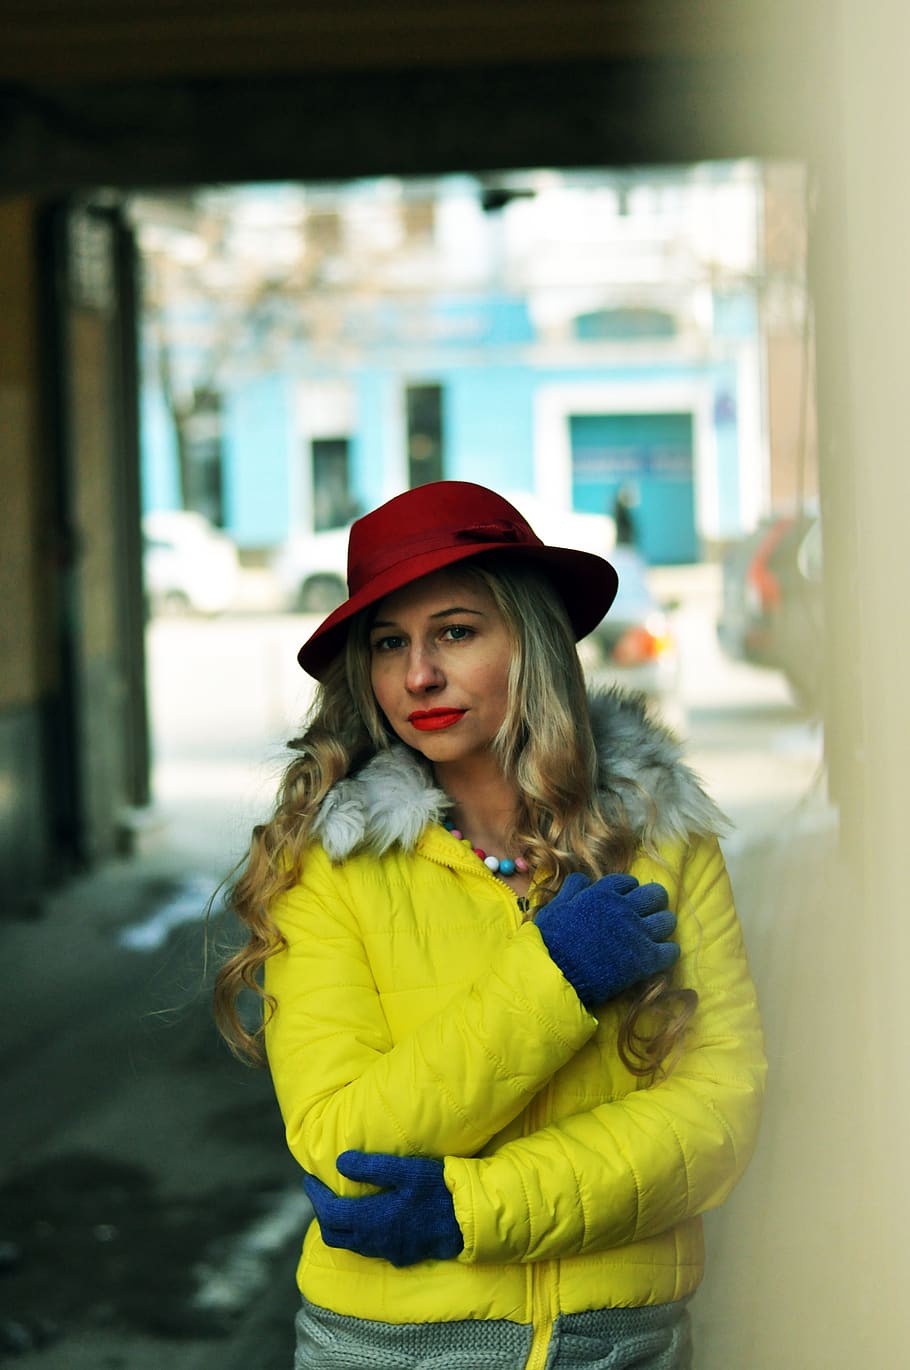 bright jacket, arch house, city, winter, coldly, cap, people, woman, outdoors, portrait